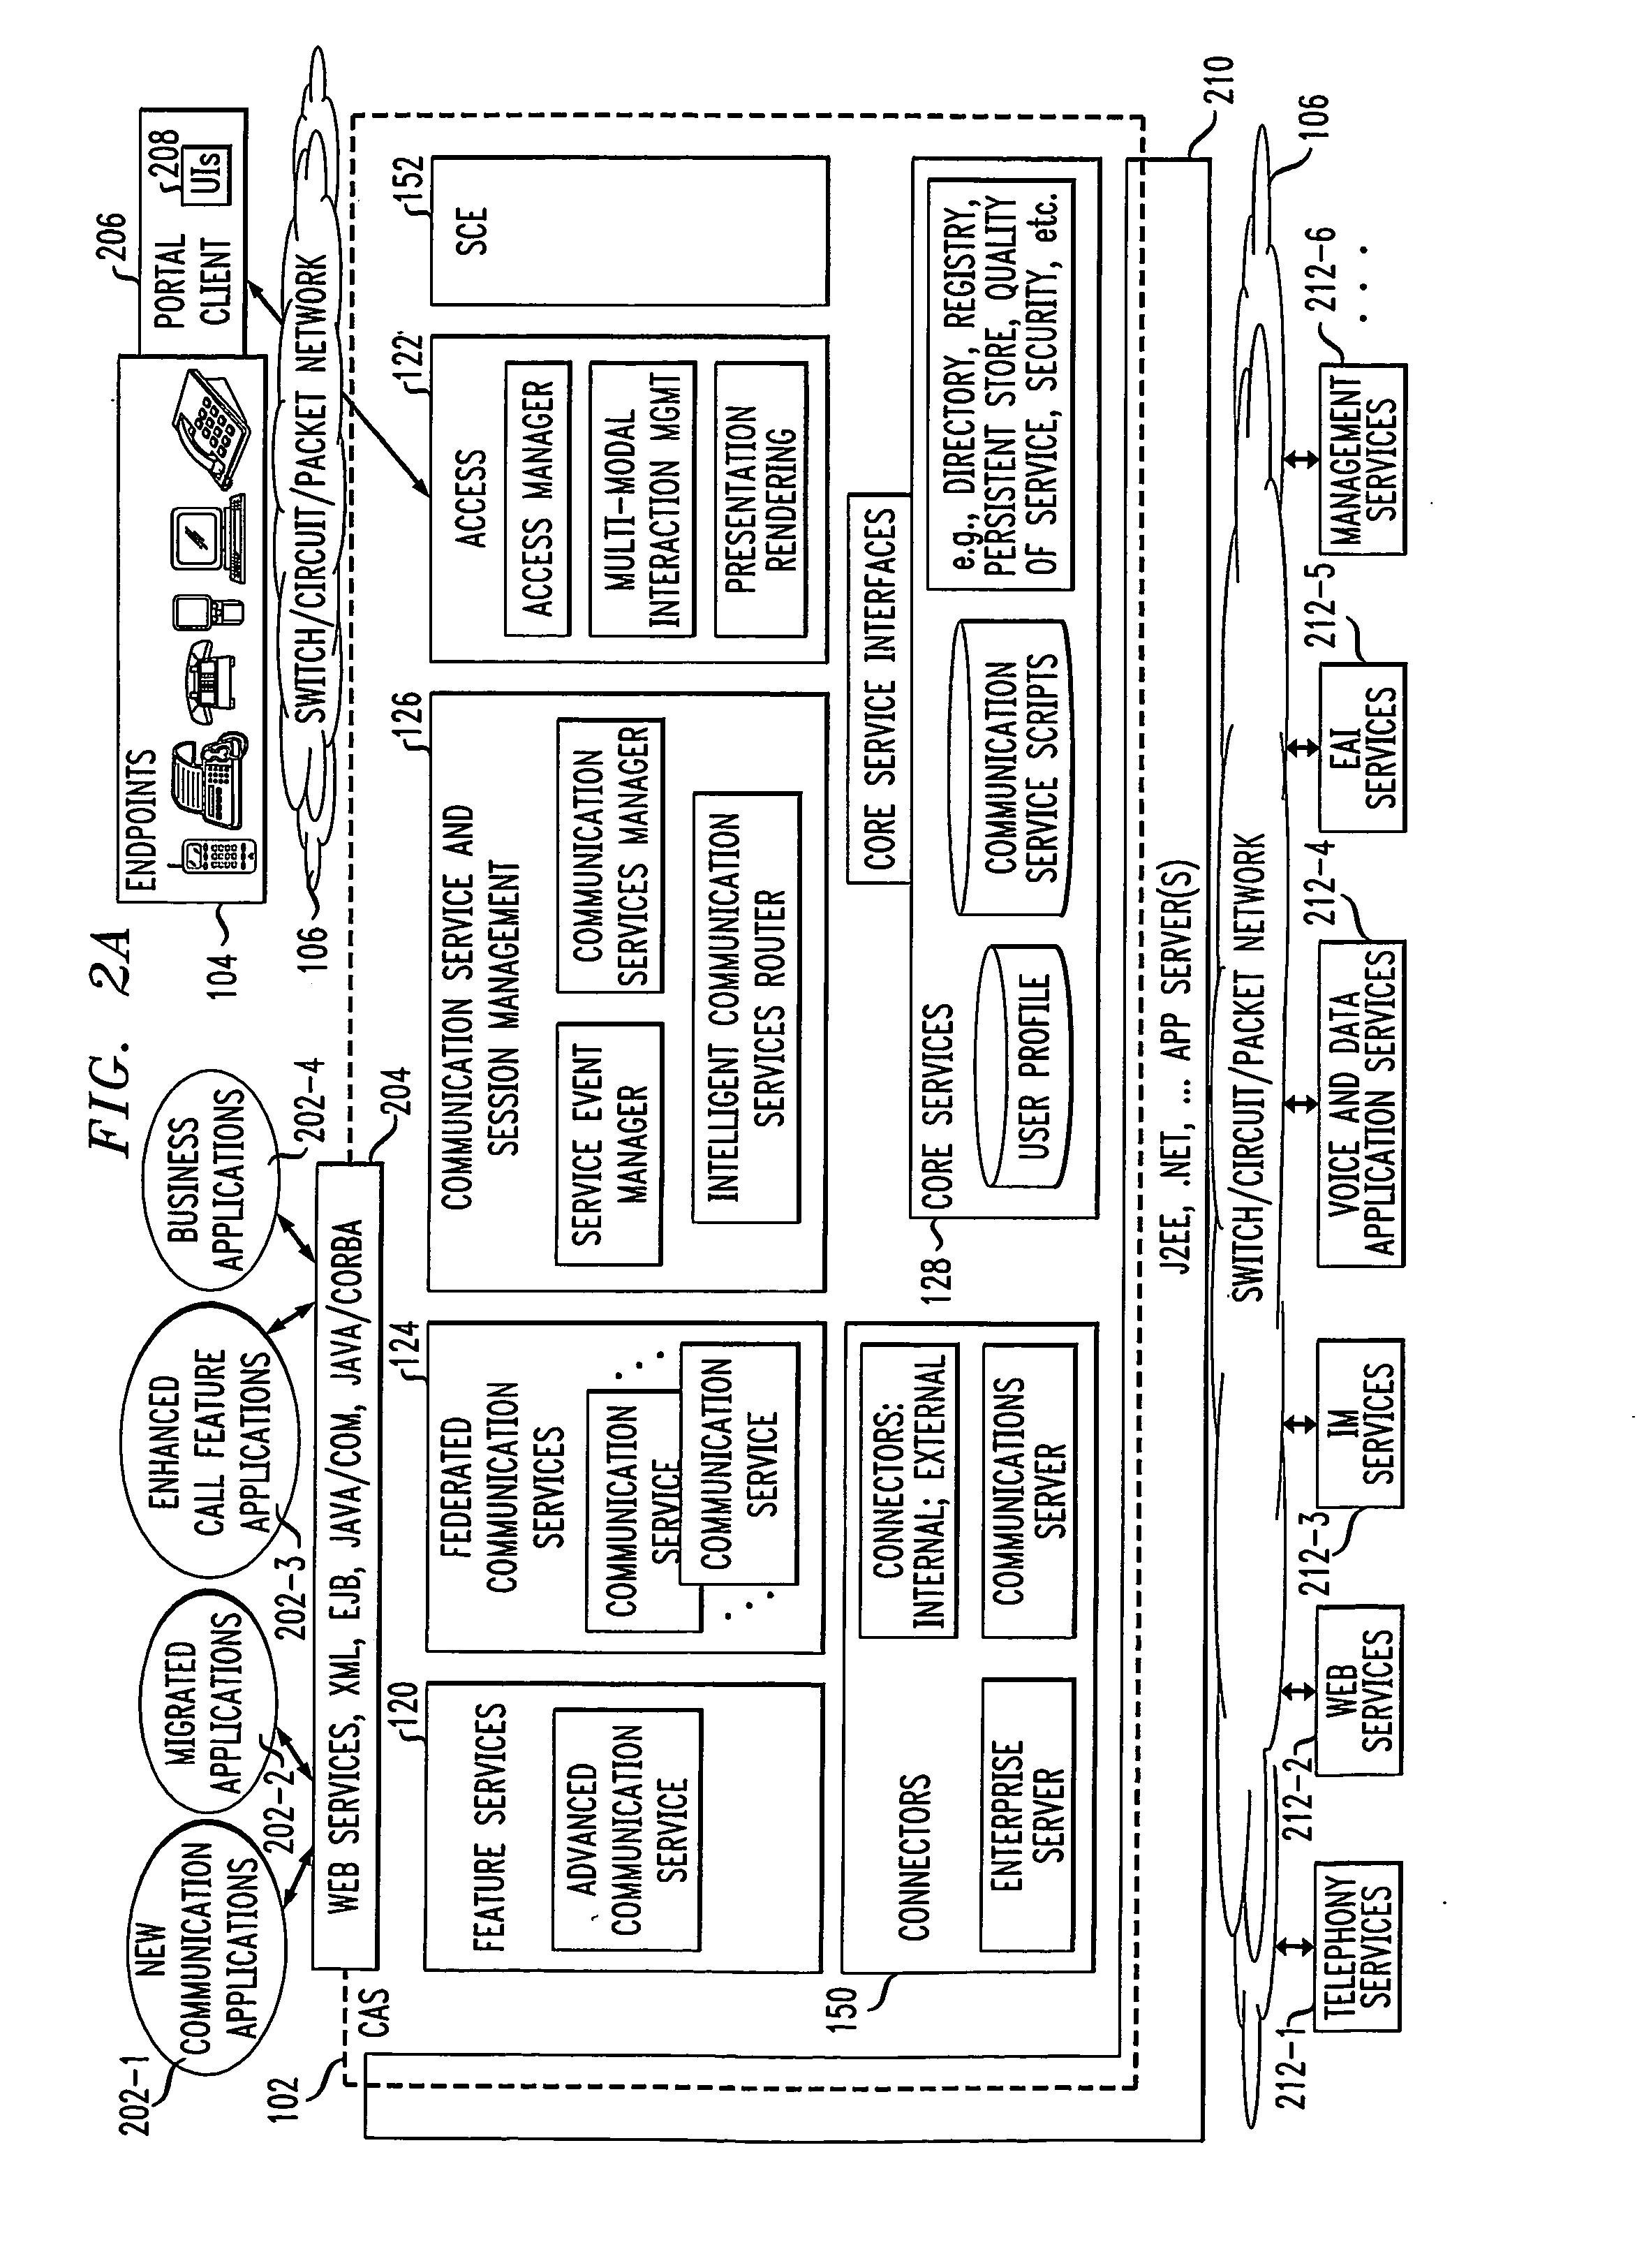 Communication application server for converged communication services